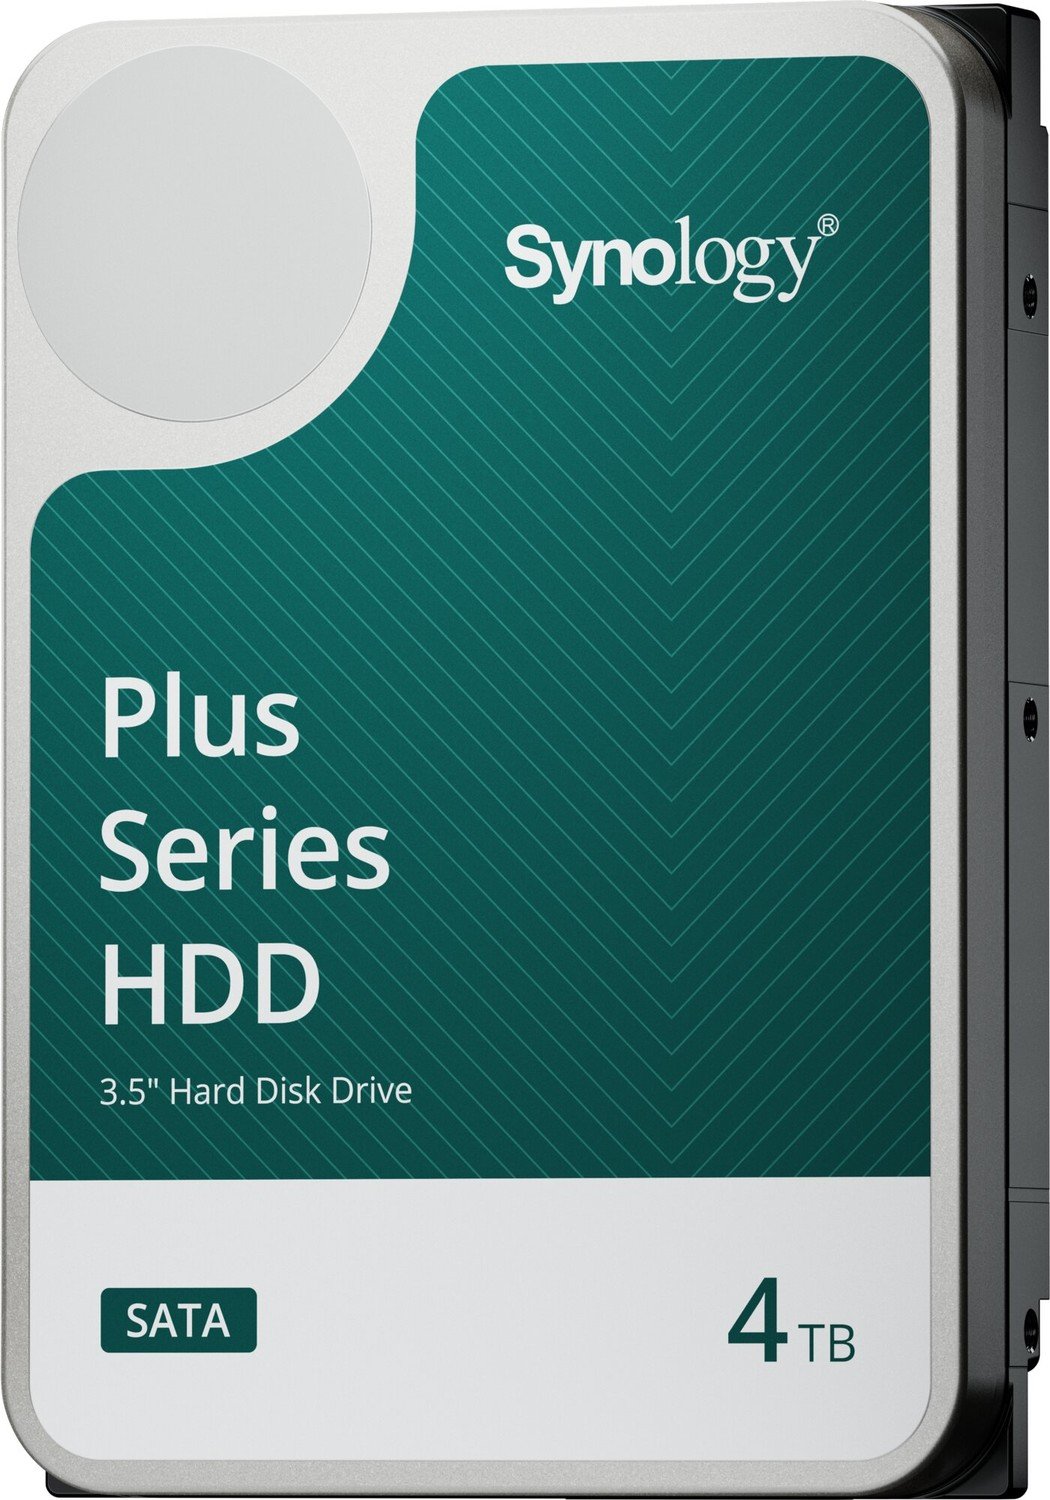 Synology HAT3300-4T, 3.5” - 4TB - HAT3300-4T